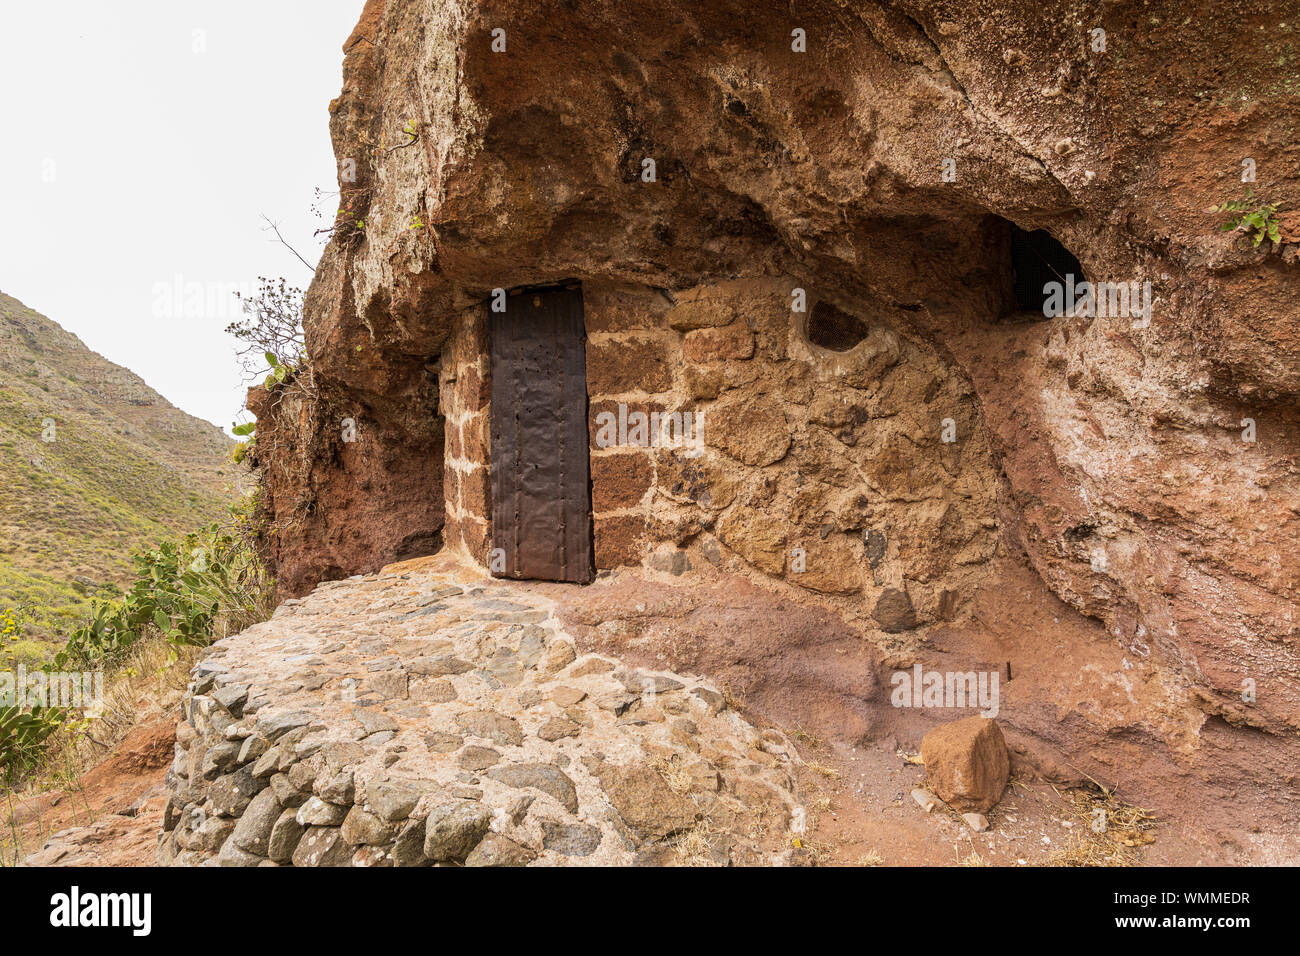 Old cave dwelling with rusted metal door, storage room in barranco seco, Anaga, Tenerife, Canary Islands, Spain Stock Photo